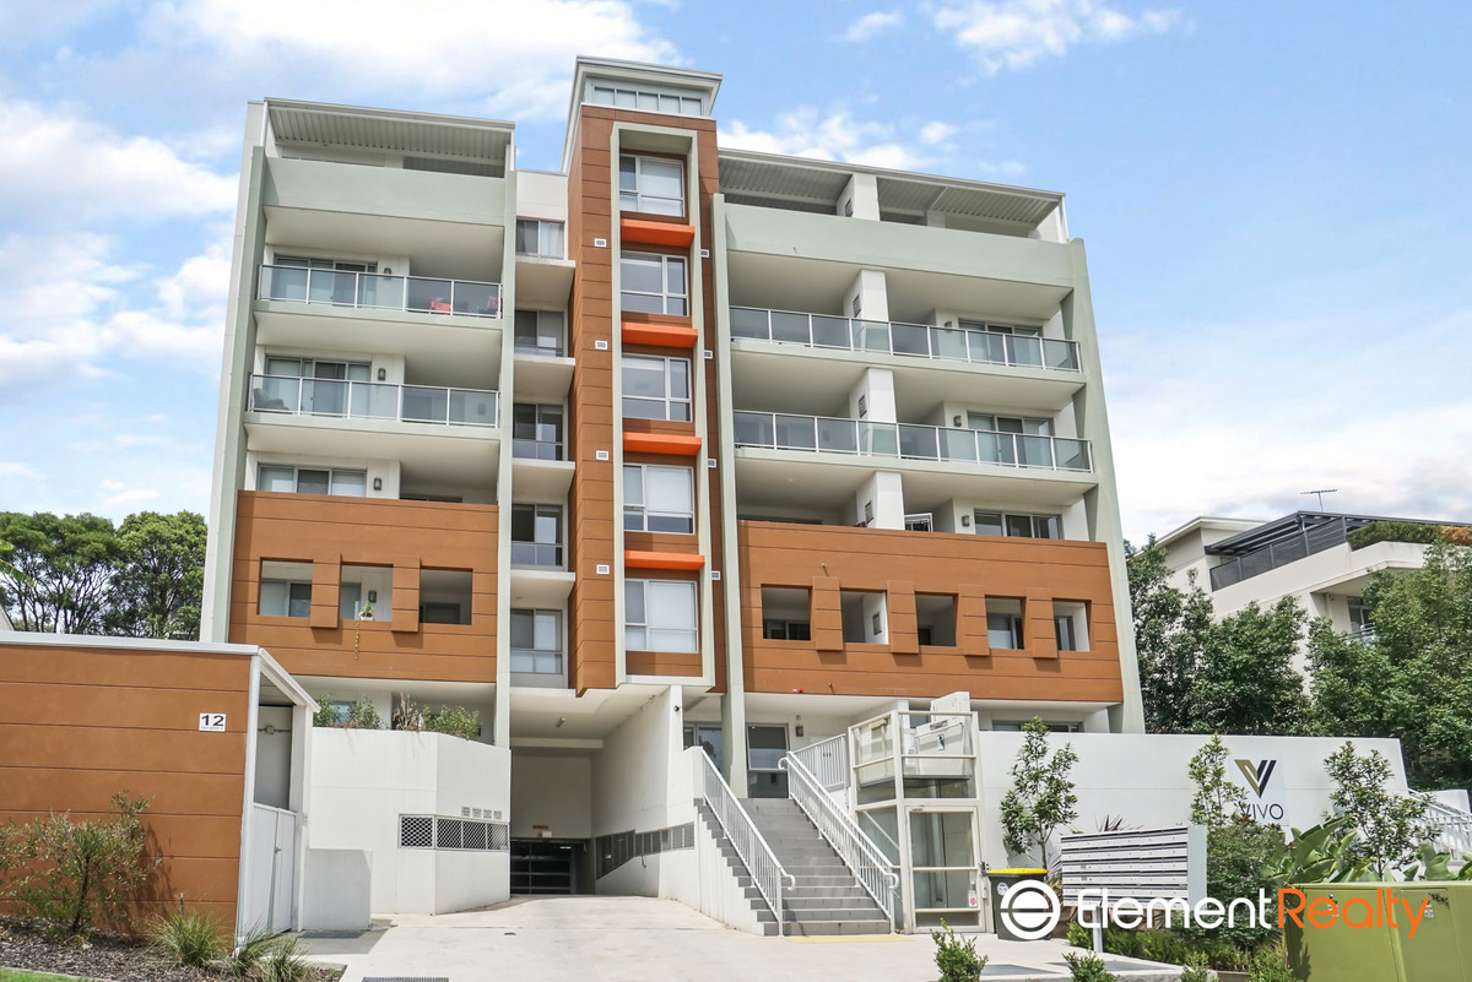 Main view of Homely apartment listing, 5/12-12A Post Office Street, Carlingford NSW 2118